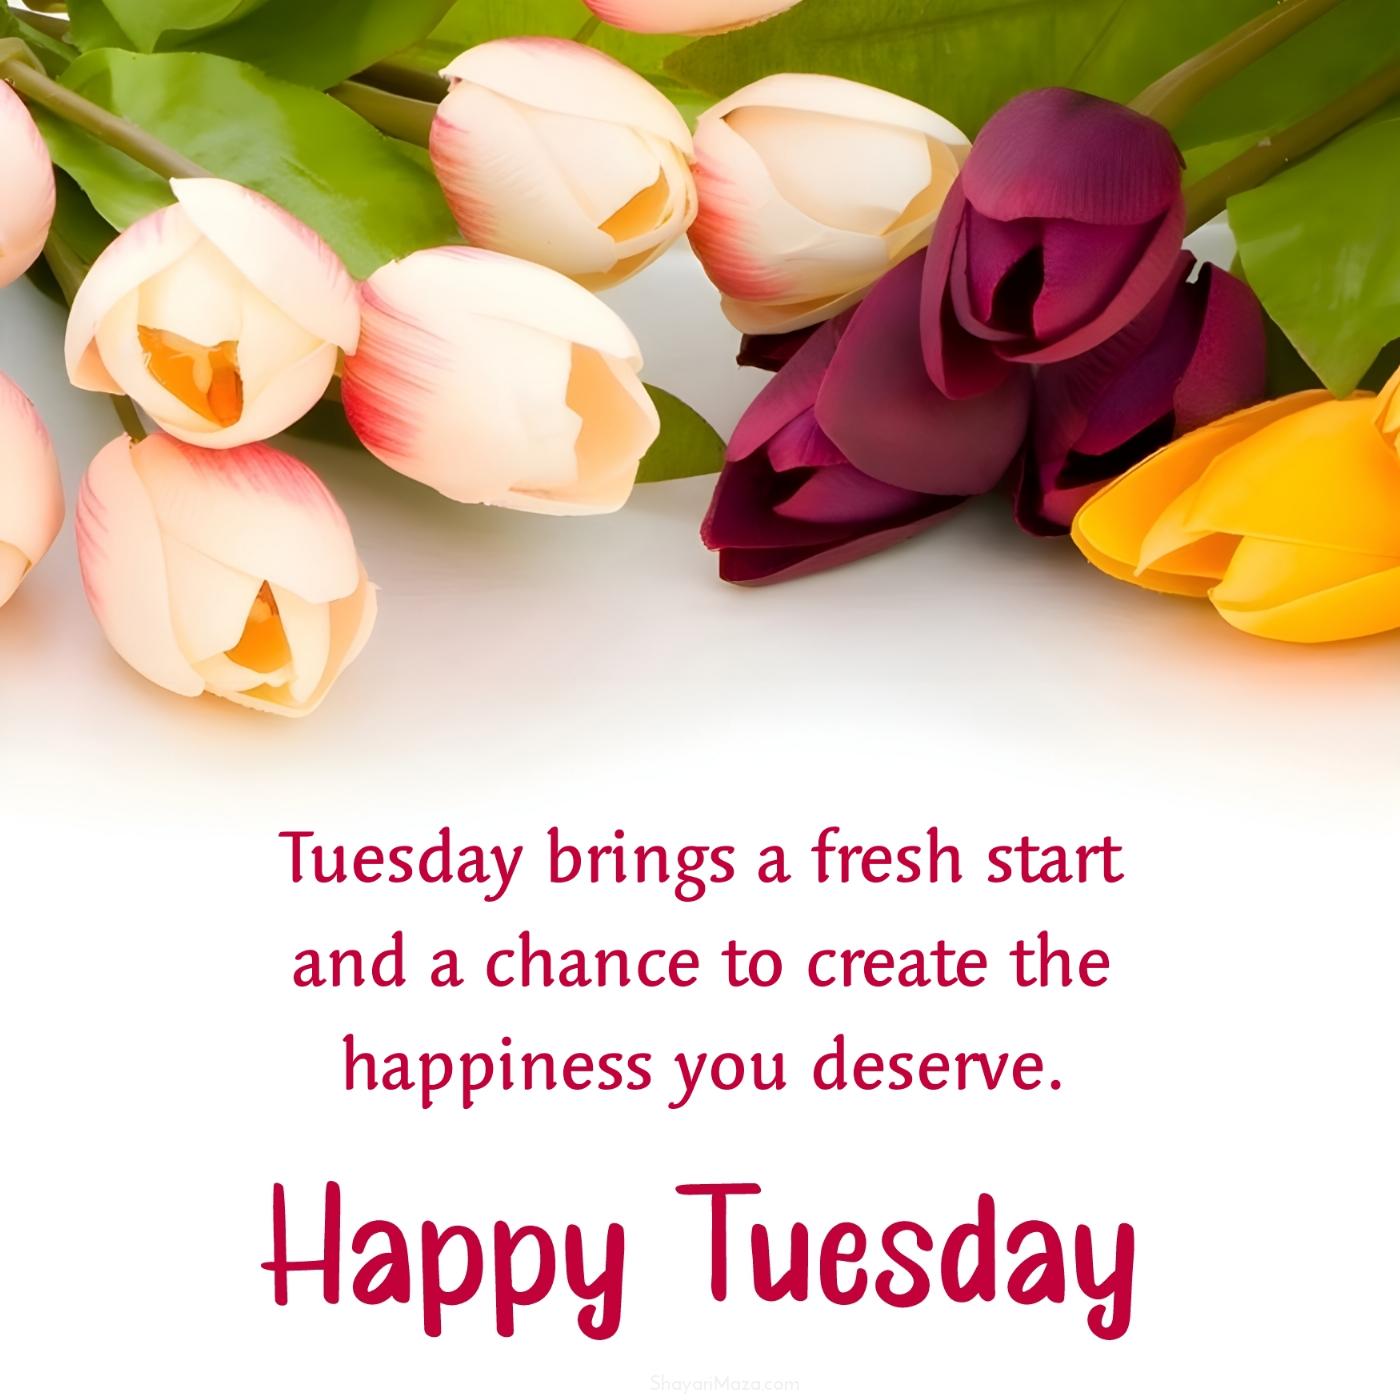 Tuesday brings a fresh start and a chance to create